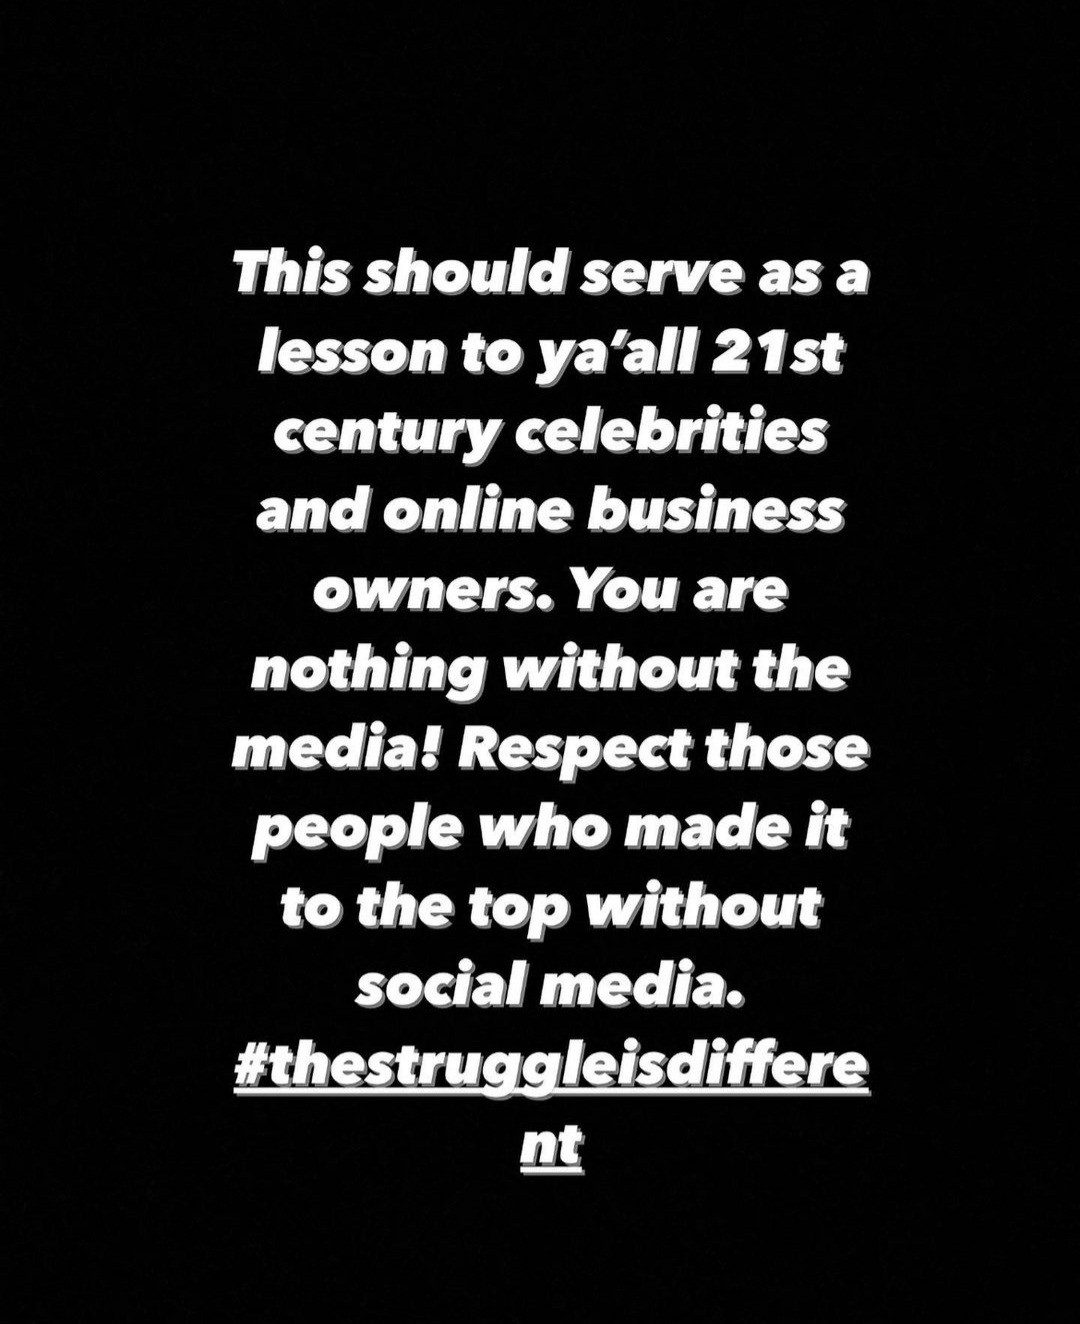 "Respect those who made it without social media" Yomi Casual tells 